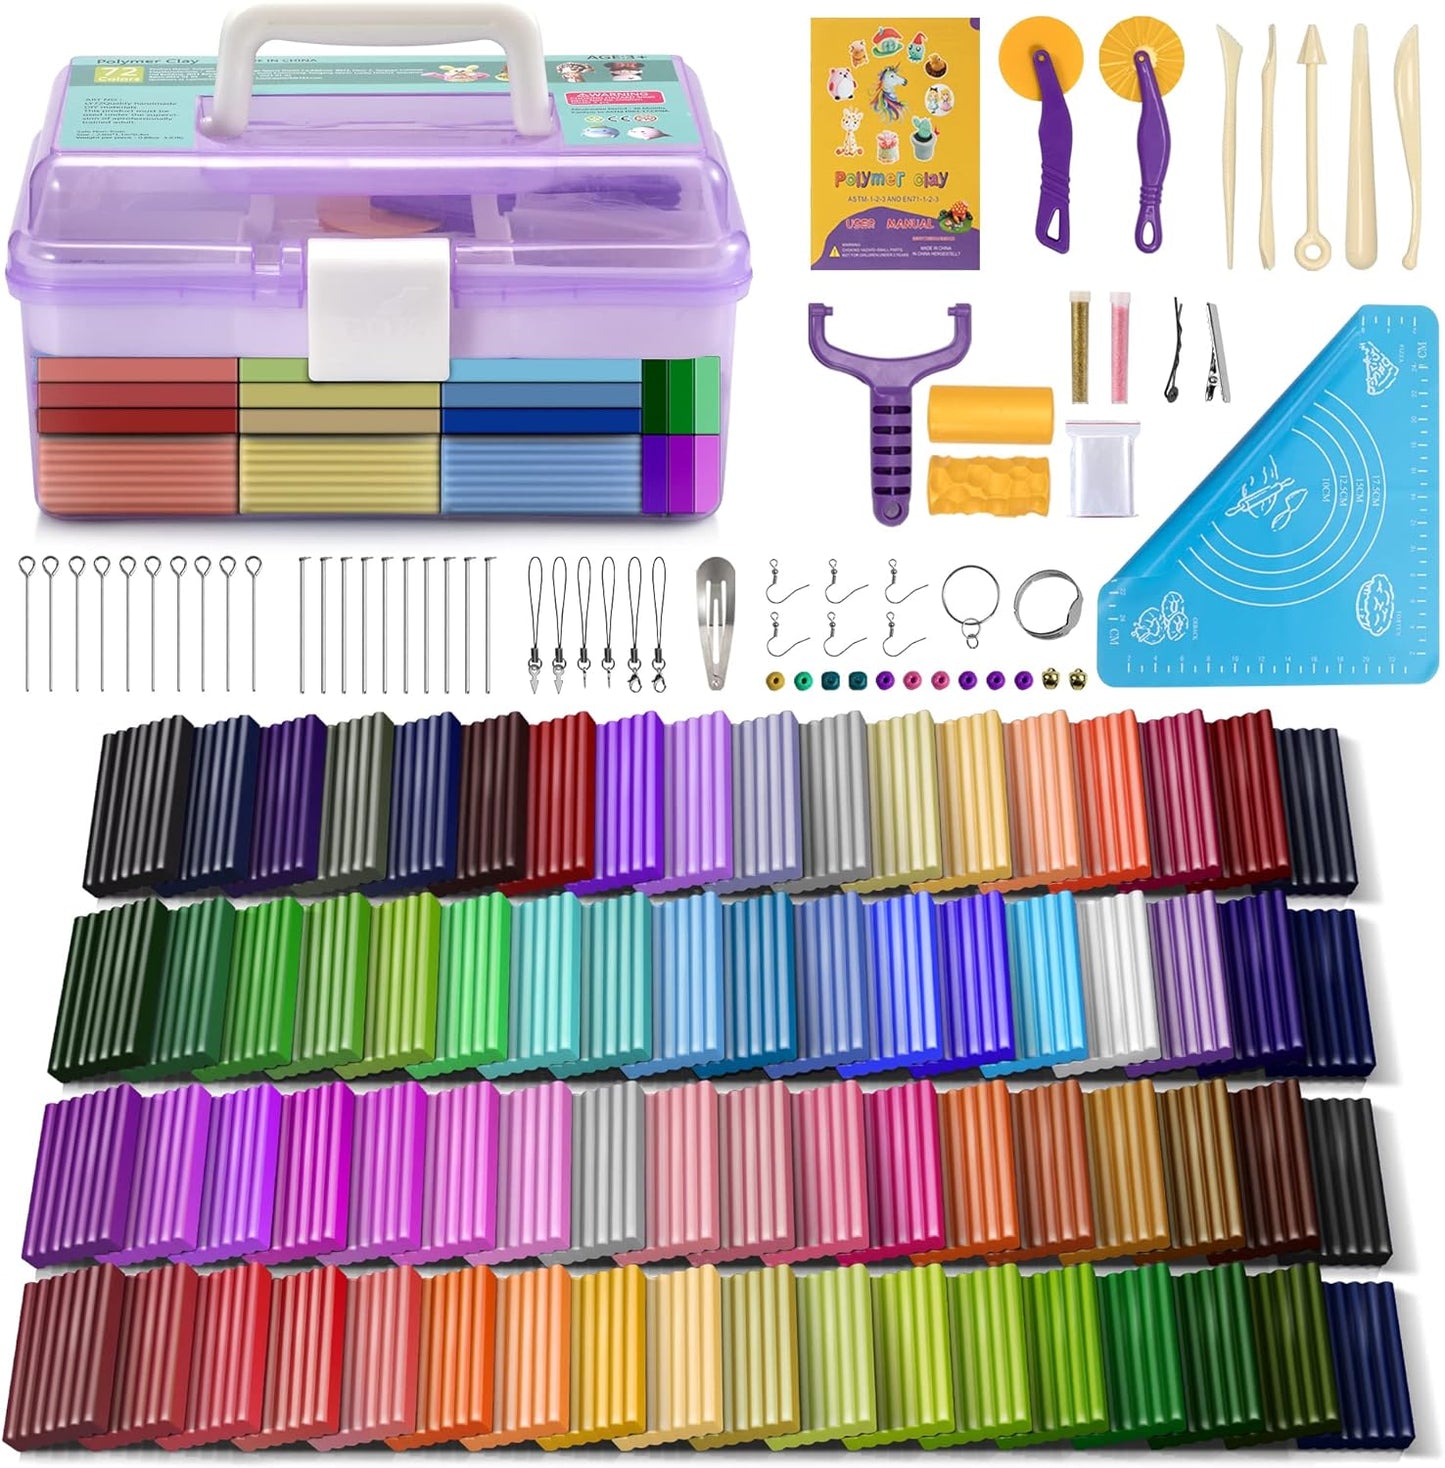 Polymer Clay 50 Colors, Modeling Clay for Kids DIY Starter Kits, Oven Baked Model Clay, Non-Sticky Molding Clay with Sculpting Tools, Gift for Children and Artists (50 Colors A)